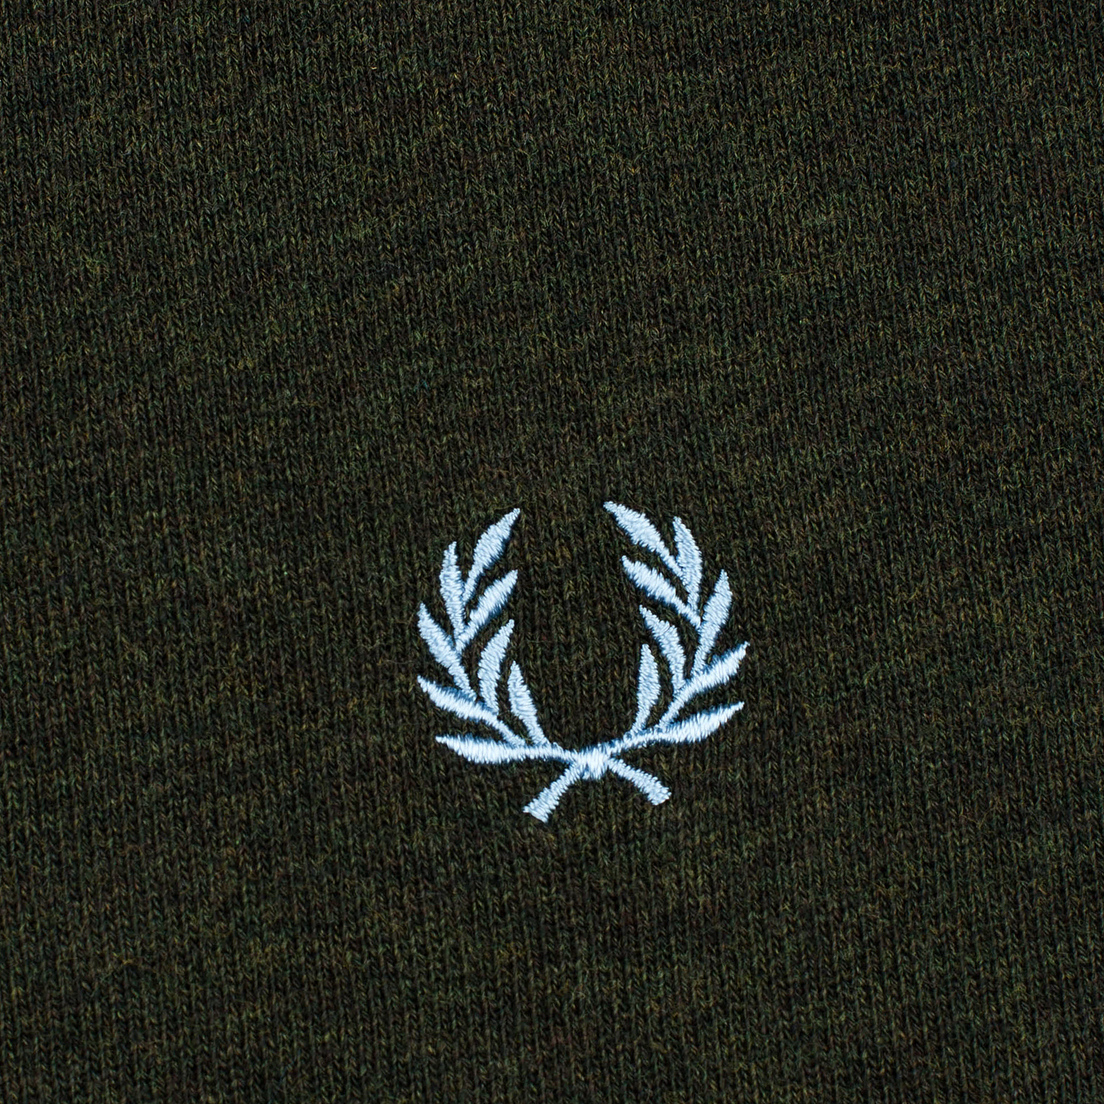 Fred Perry Мужская толстовка Loopback Neck